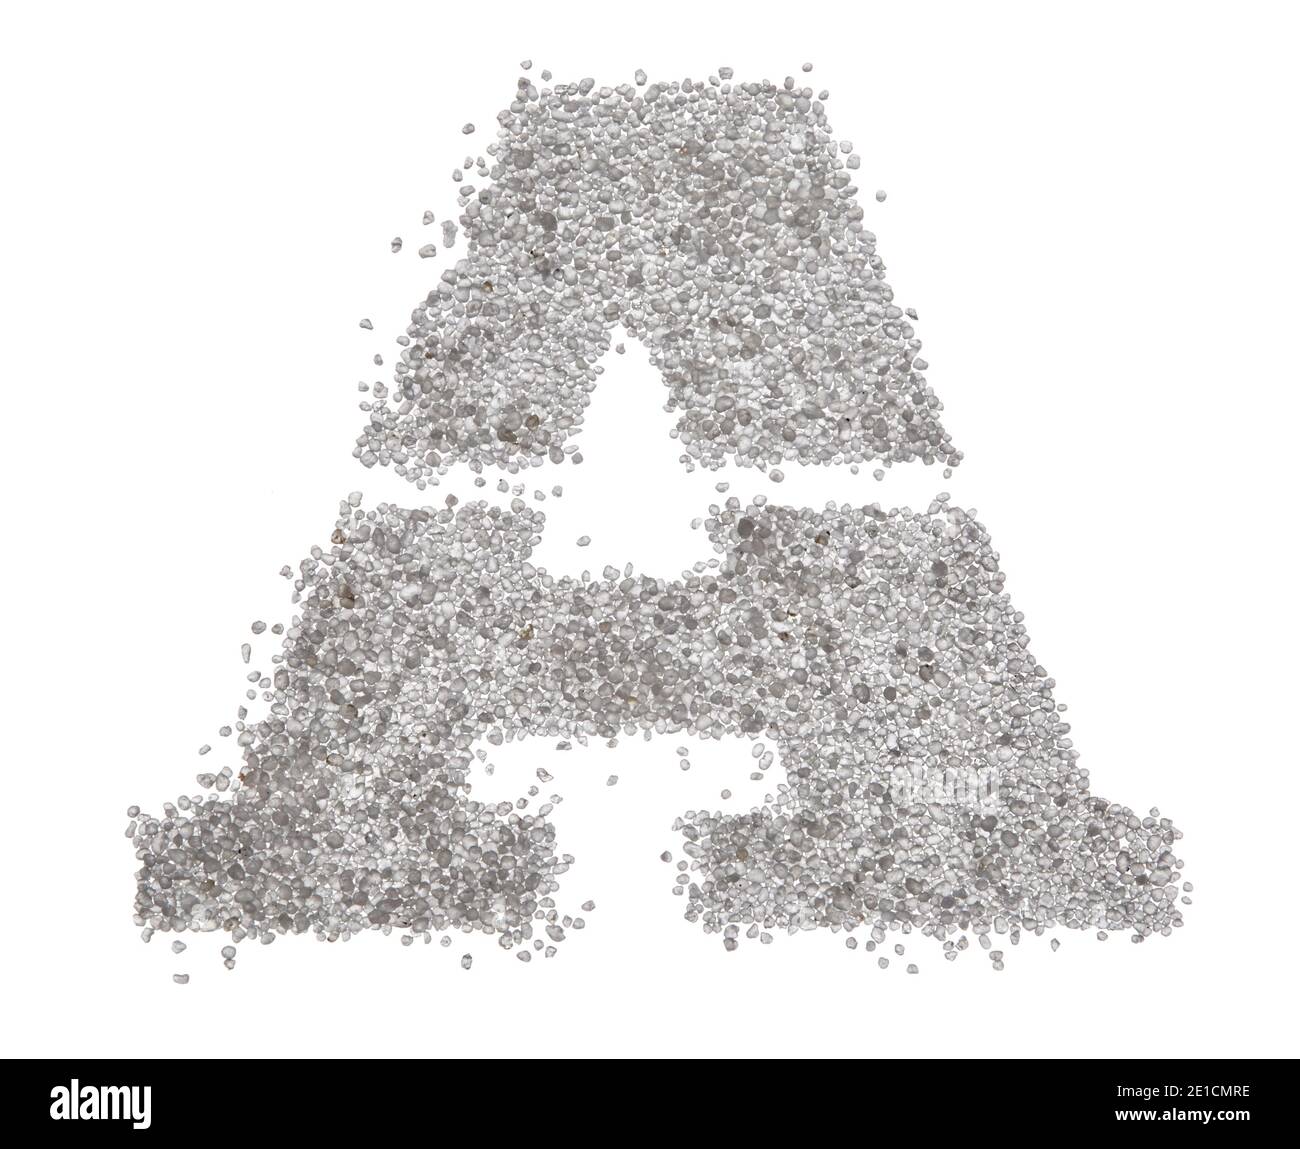 Serif sand letter capital A with sharp edges photographed on a white background Stock Photo